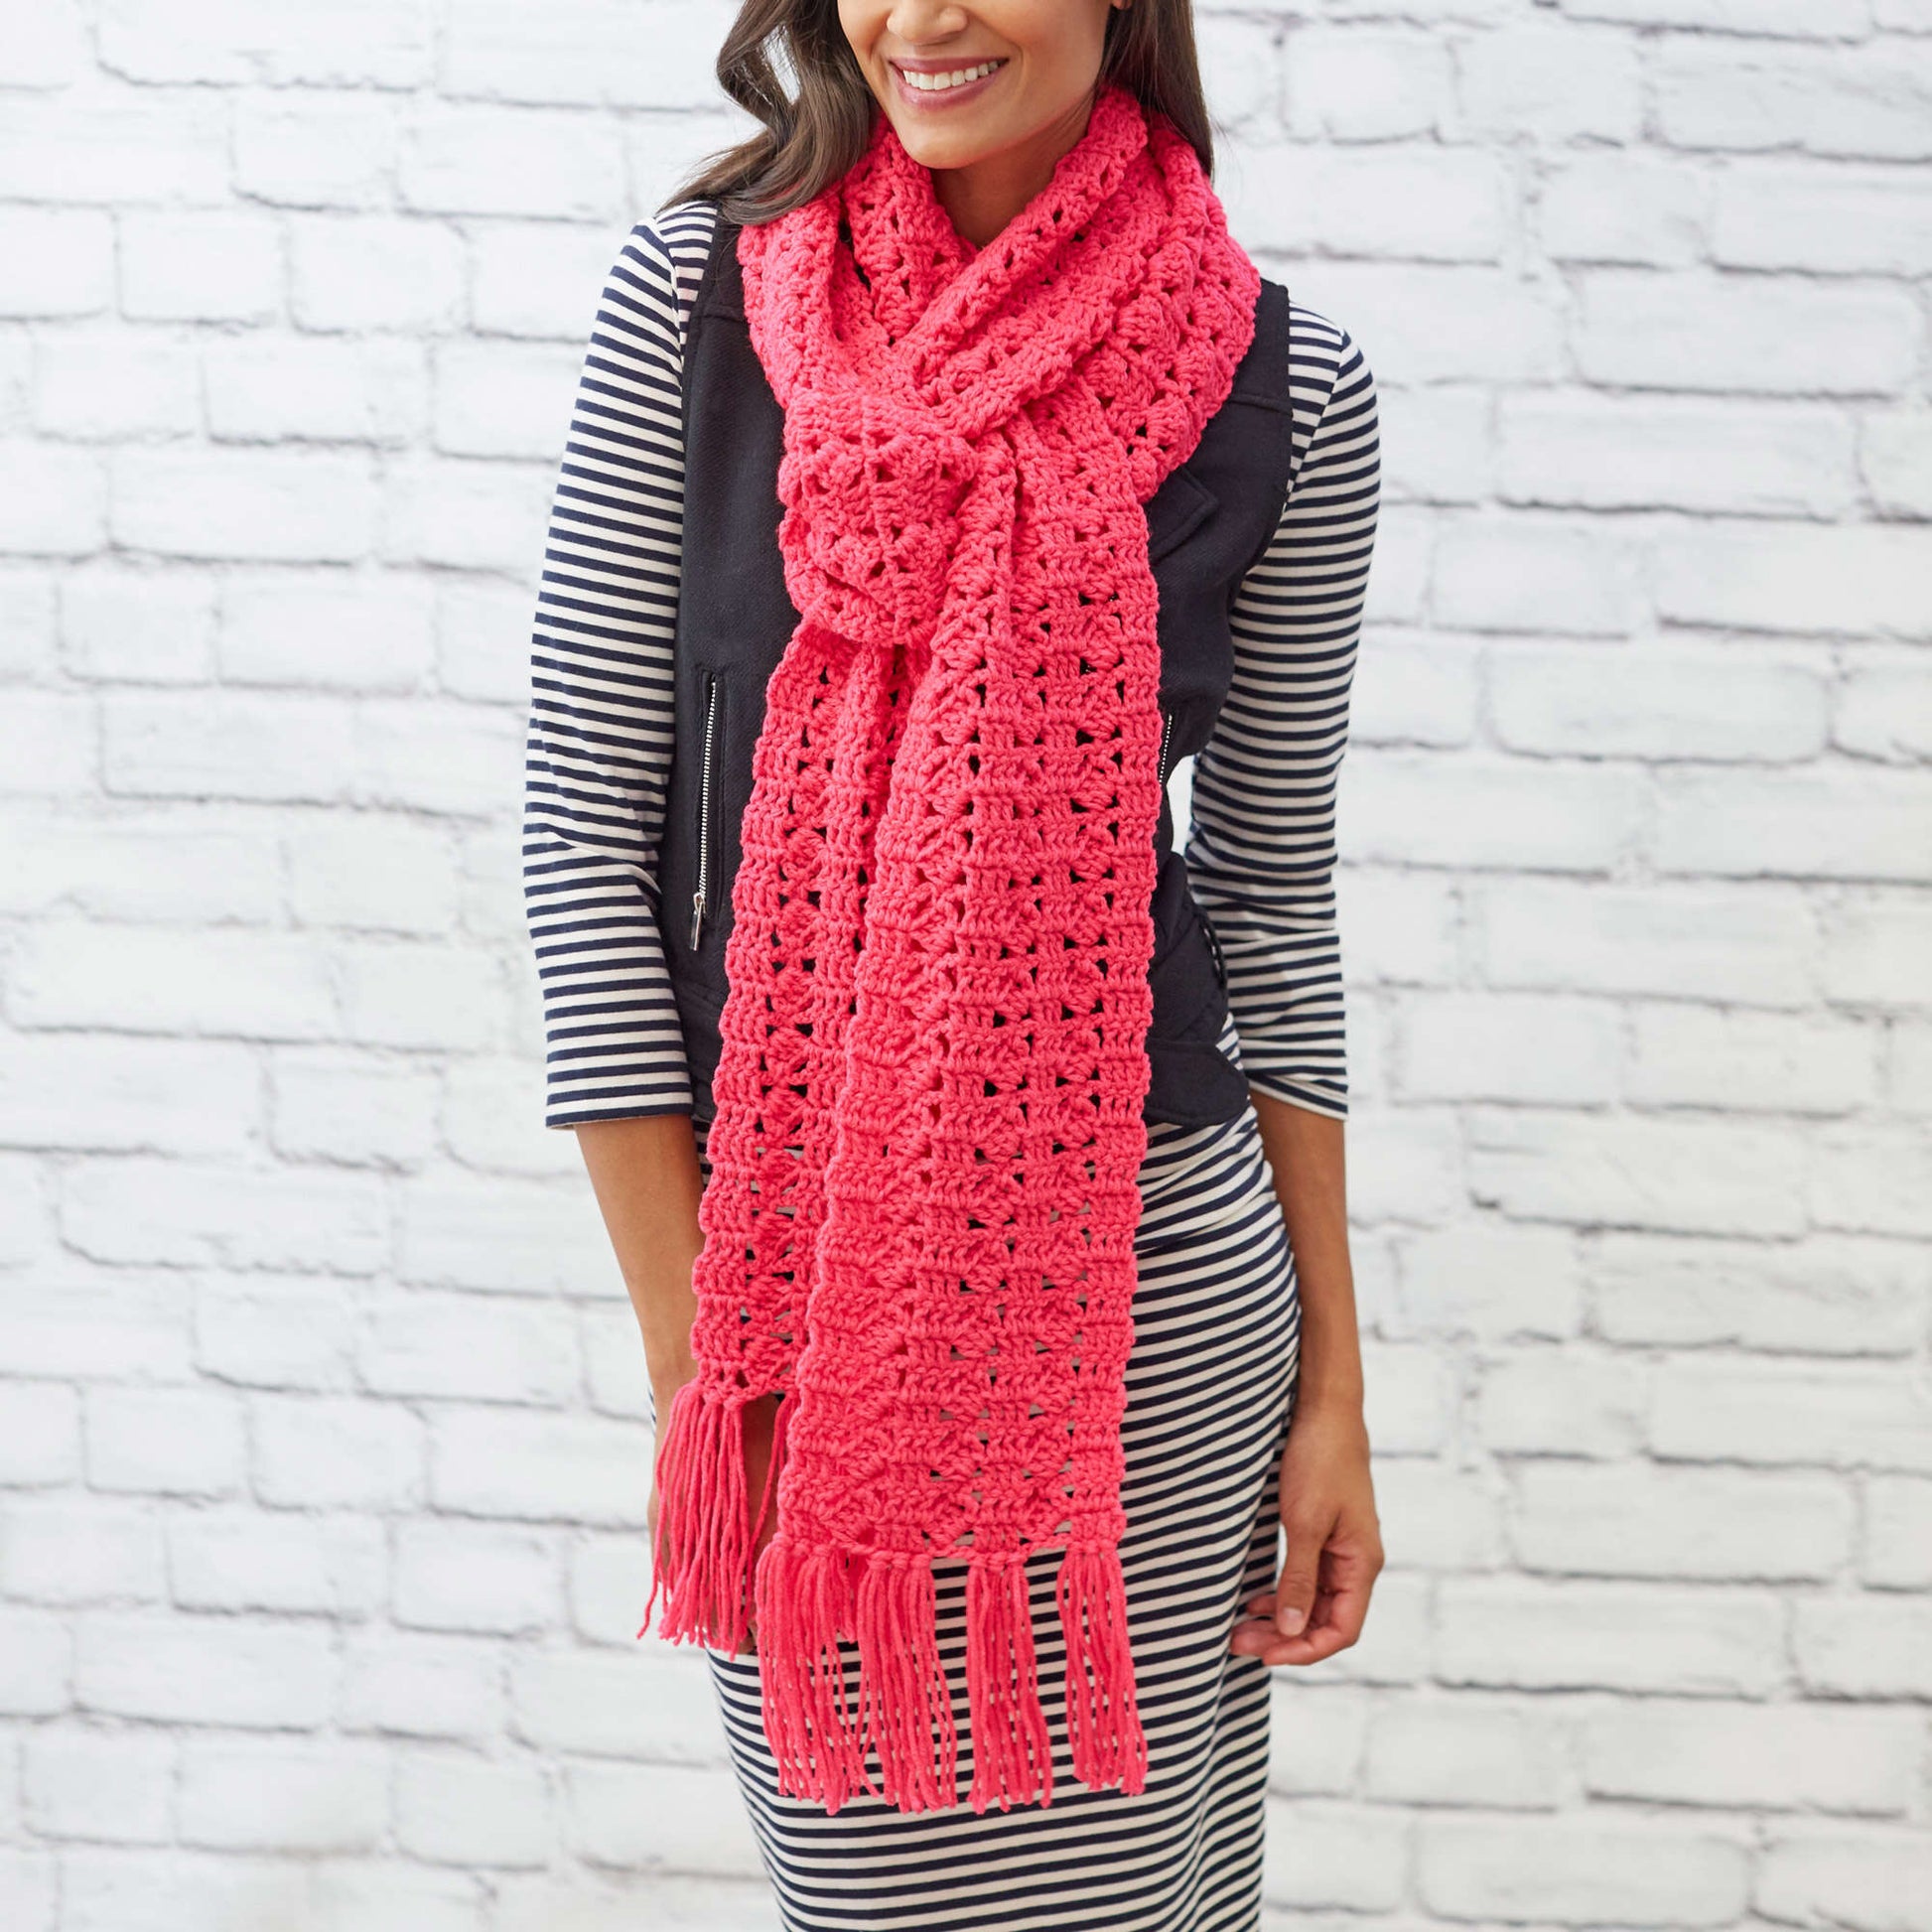 Free Red Heart Crochet Cosmo Scarf Pattern